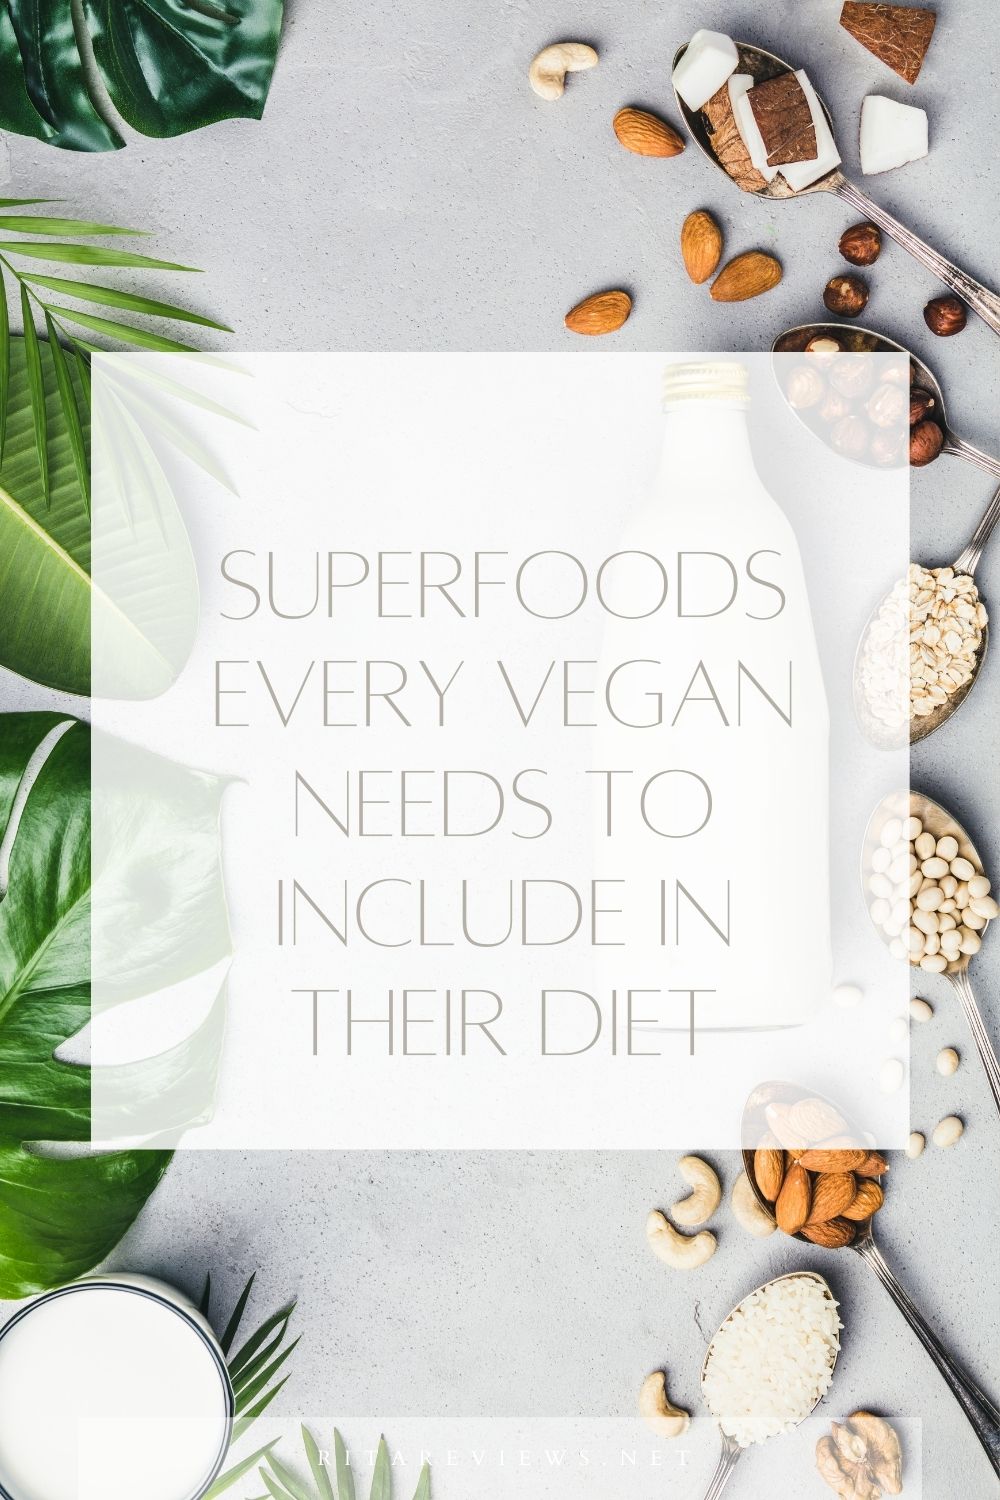 Superfoods Every Vegan Needs to Include in their Diet